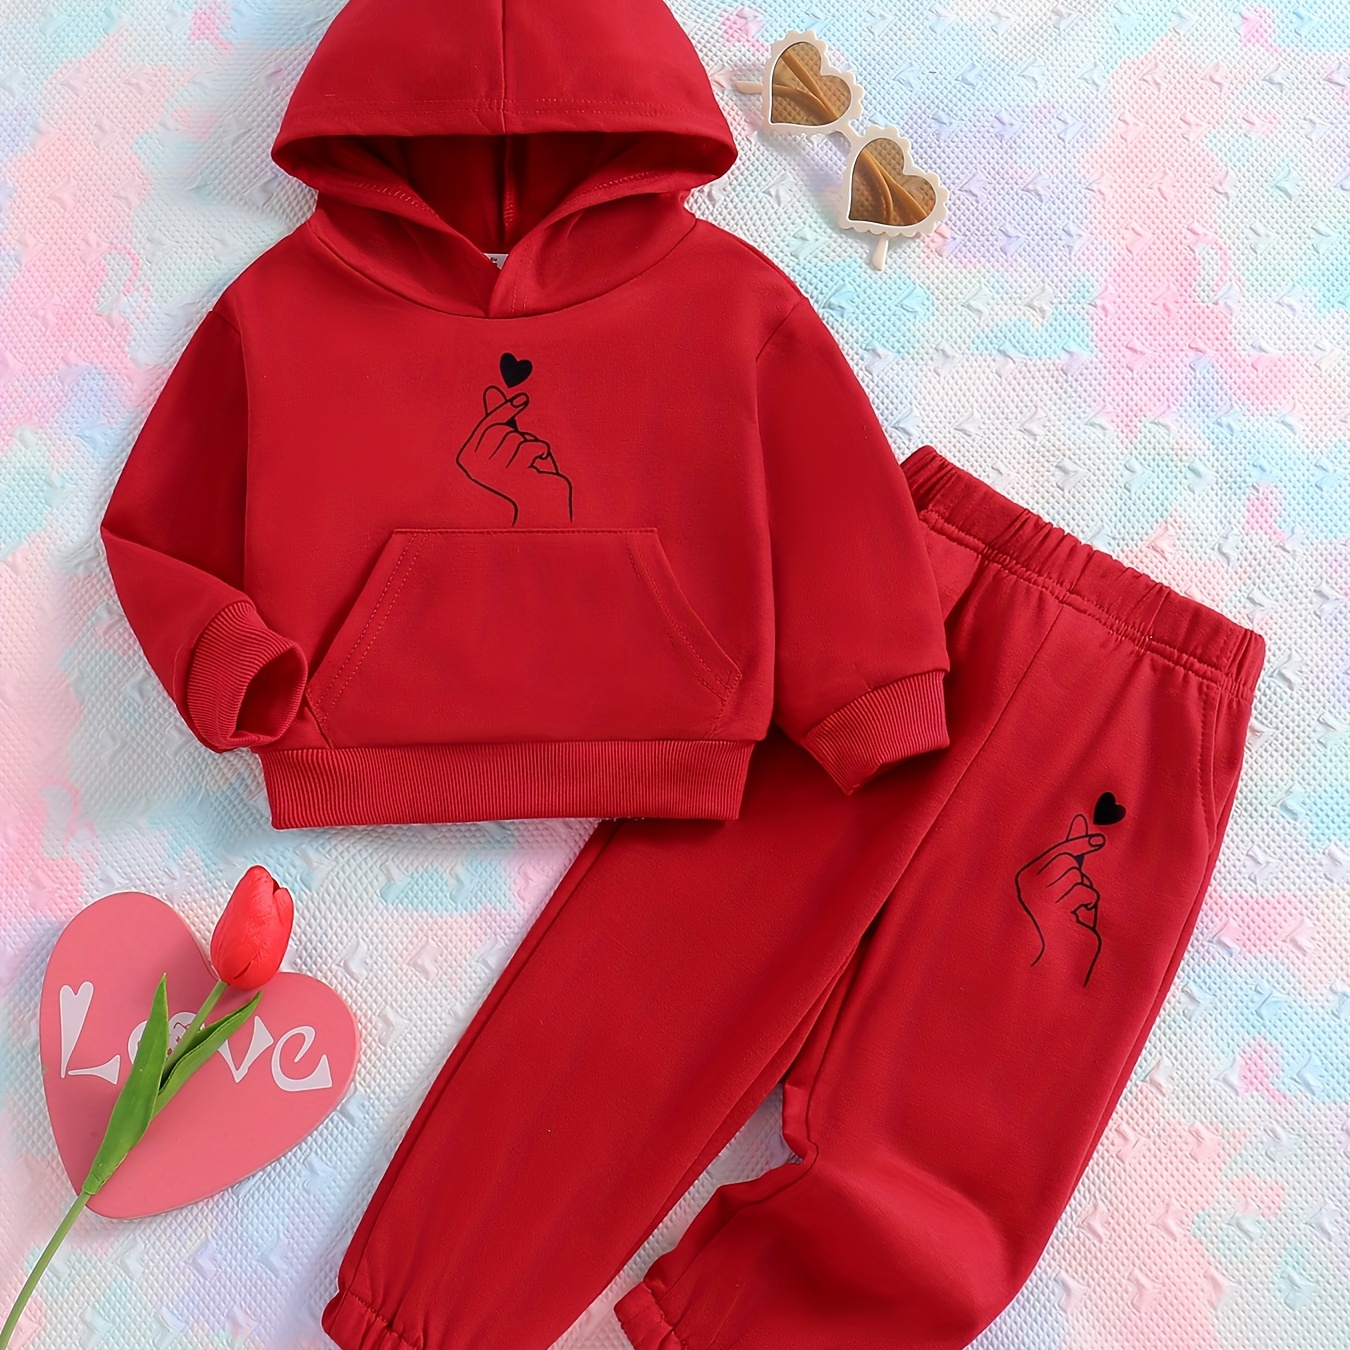 

Girl's Heart Gesture Print 2pcs, Hoodie & Sweatpants Set, Solid Color Casual Outfits, Kids Clothes For Spring Fall